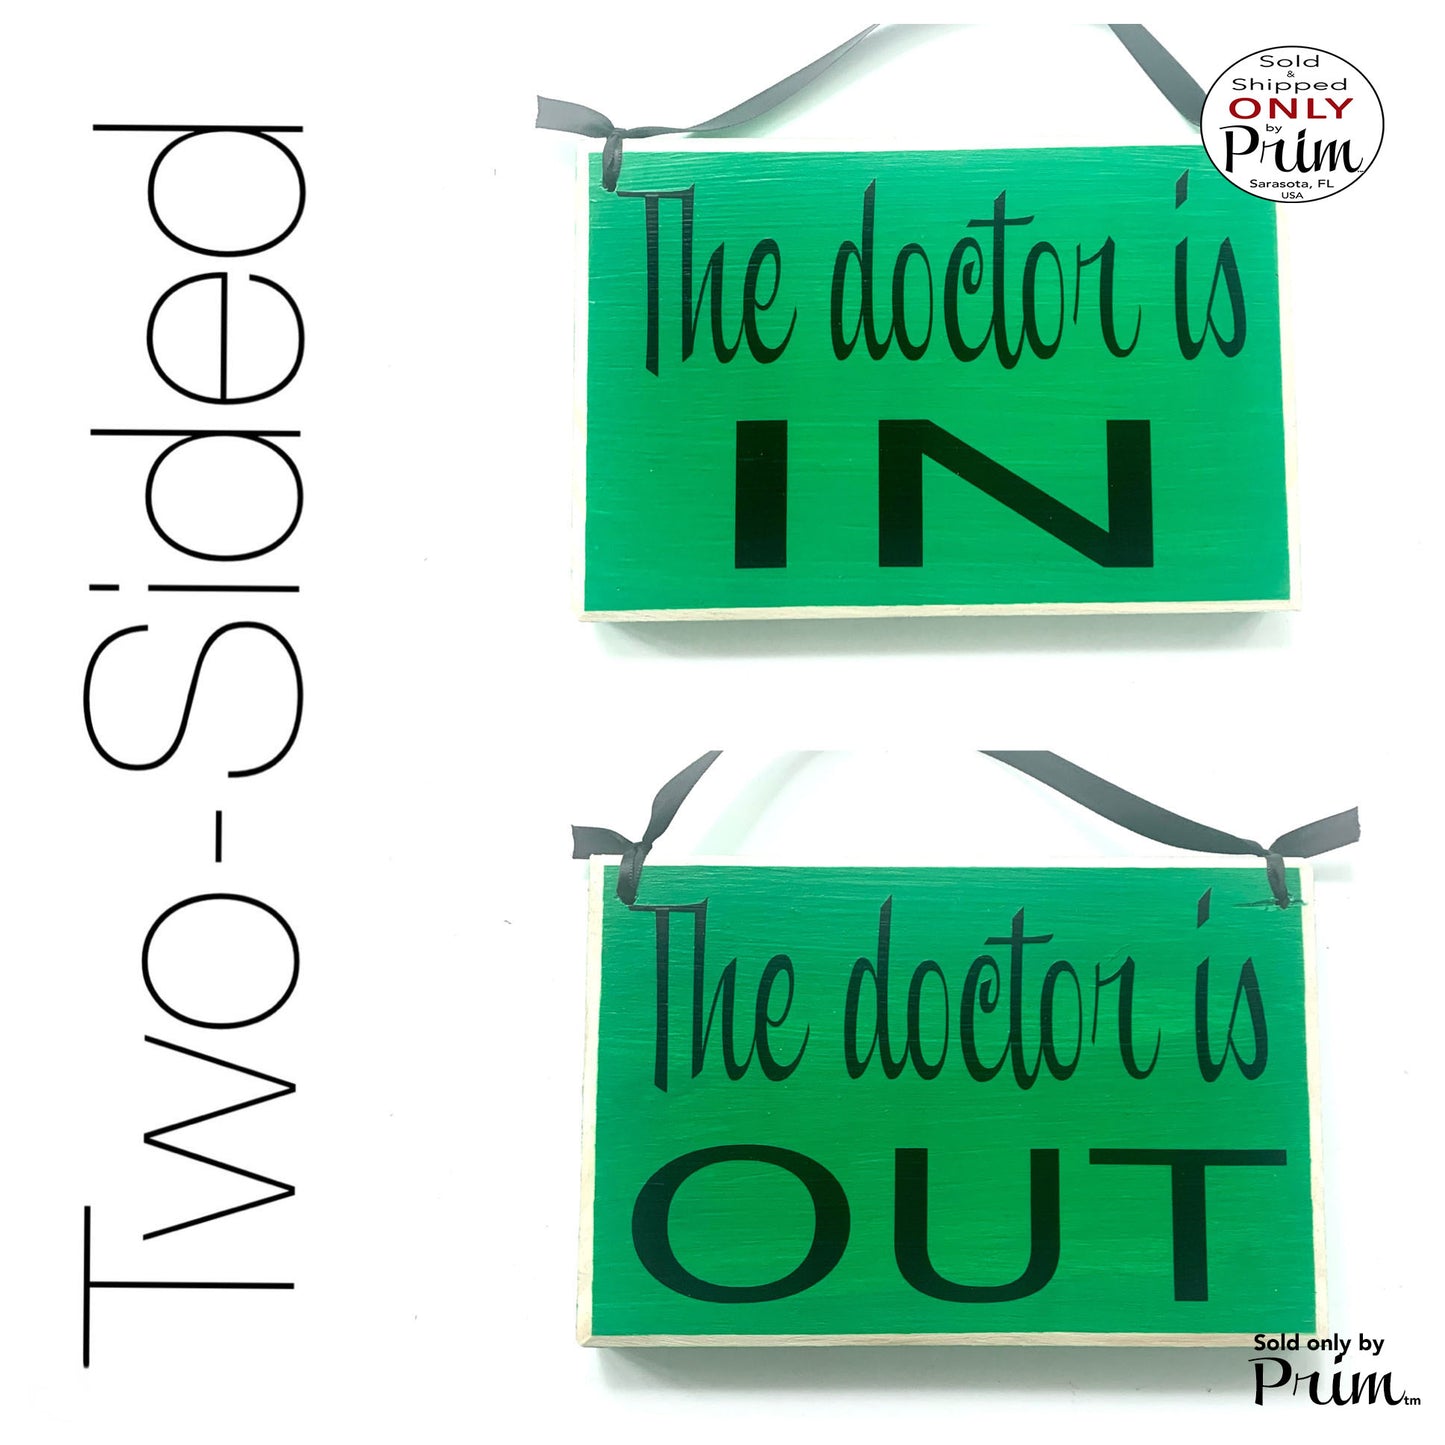 8x6 The Doctor is In Out Custom Wood Sign | Room Available With a Patient Please Do Not Disturb | Office Business Unavailable Door Plaque Designs by Prim